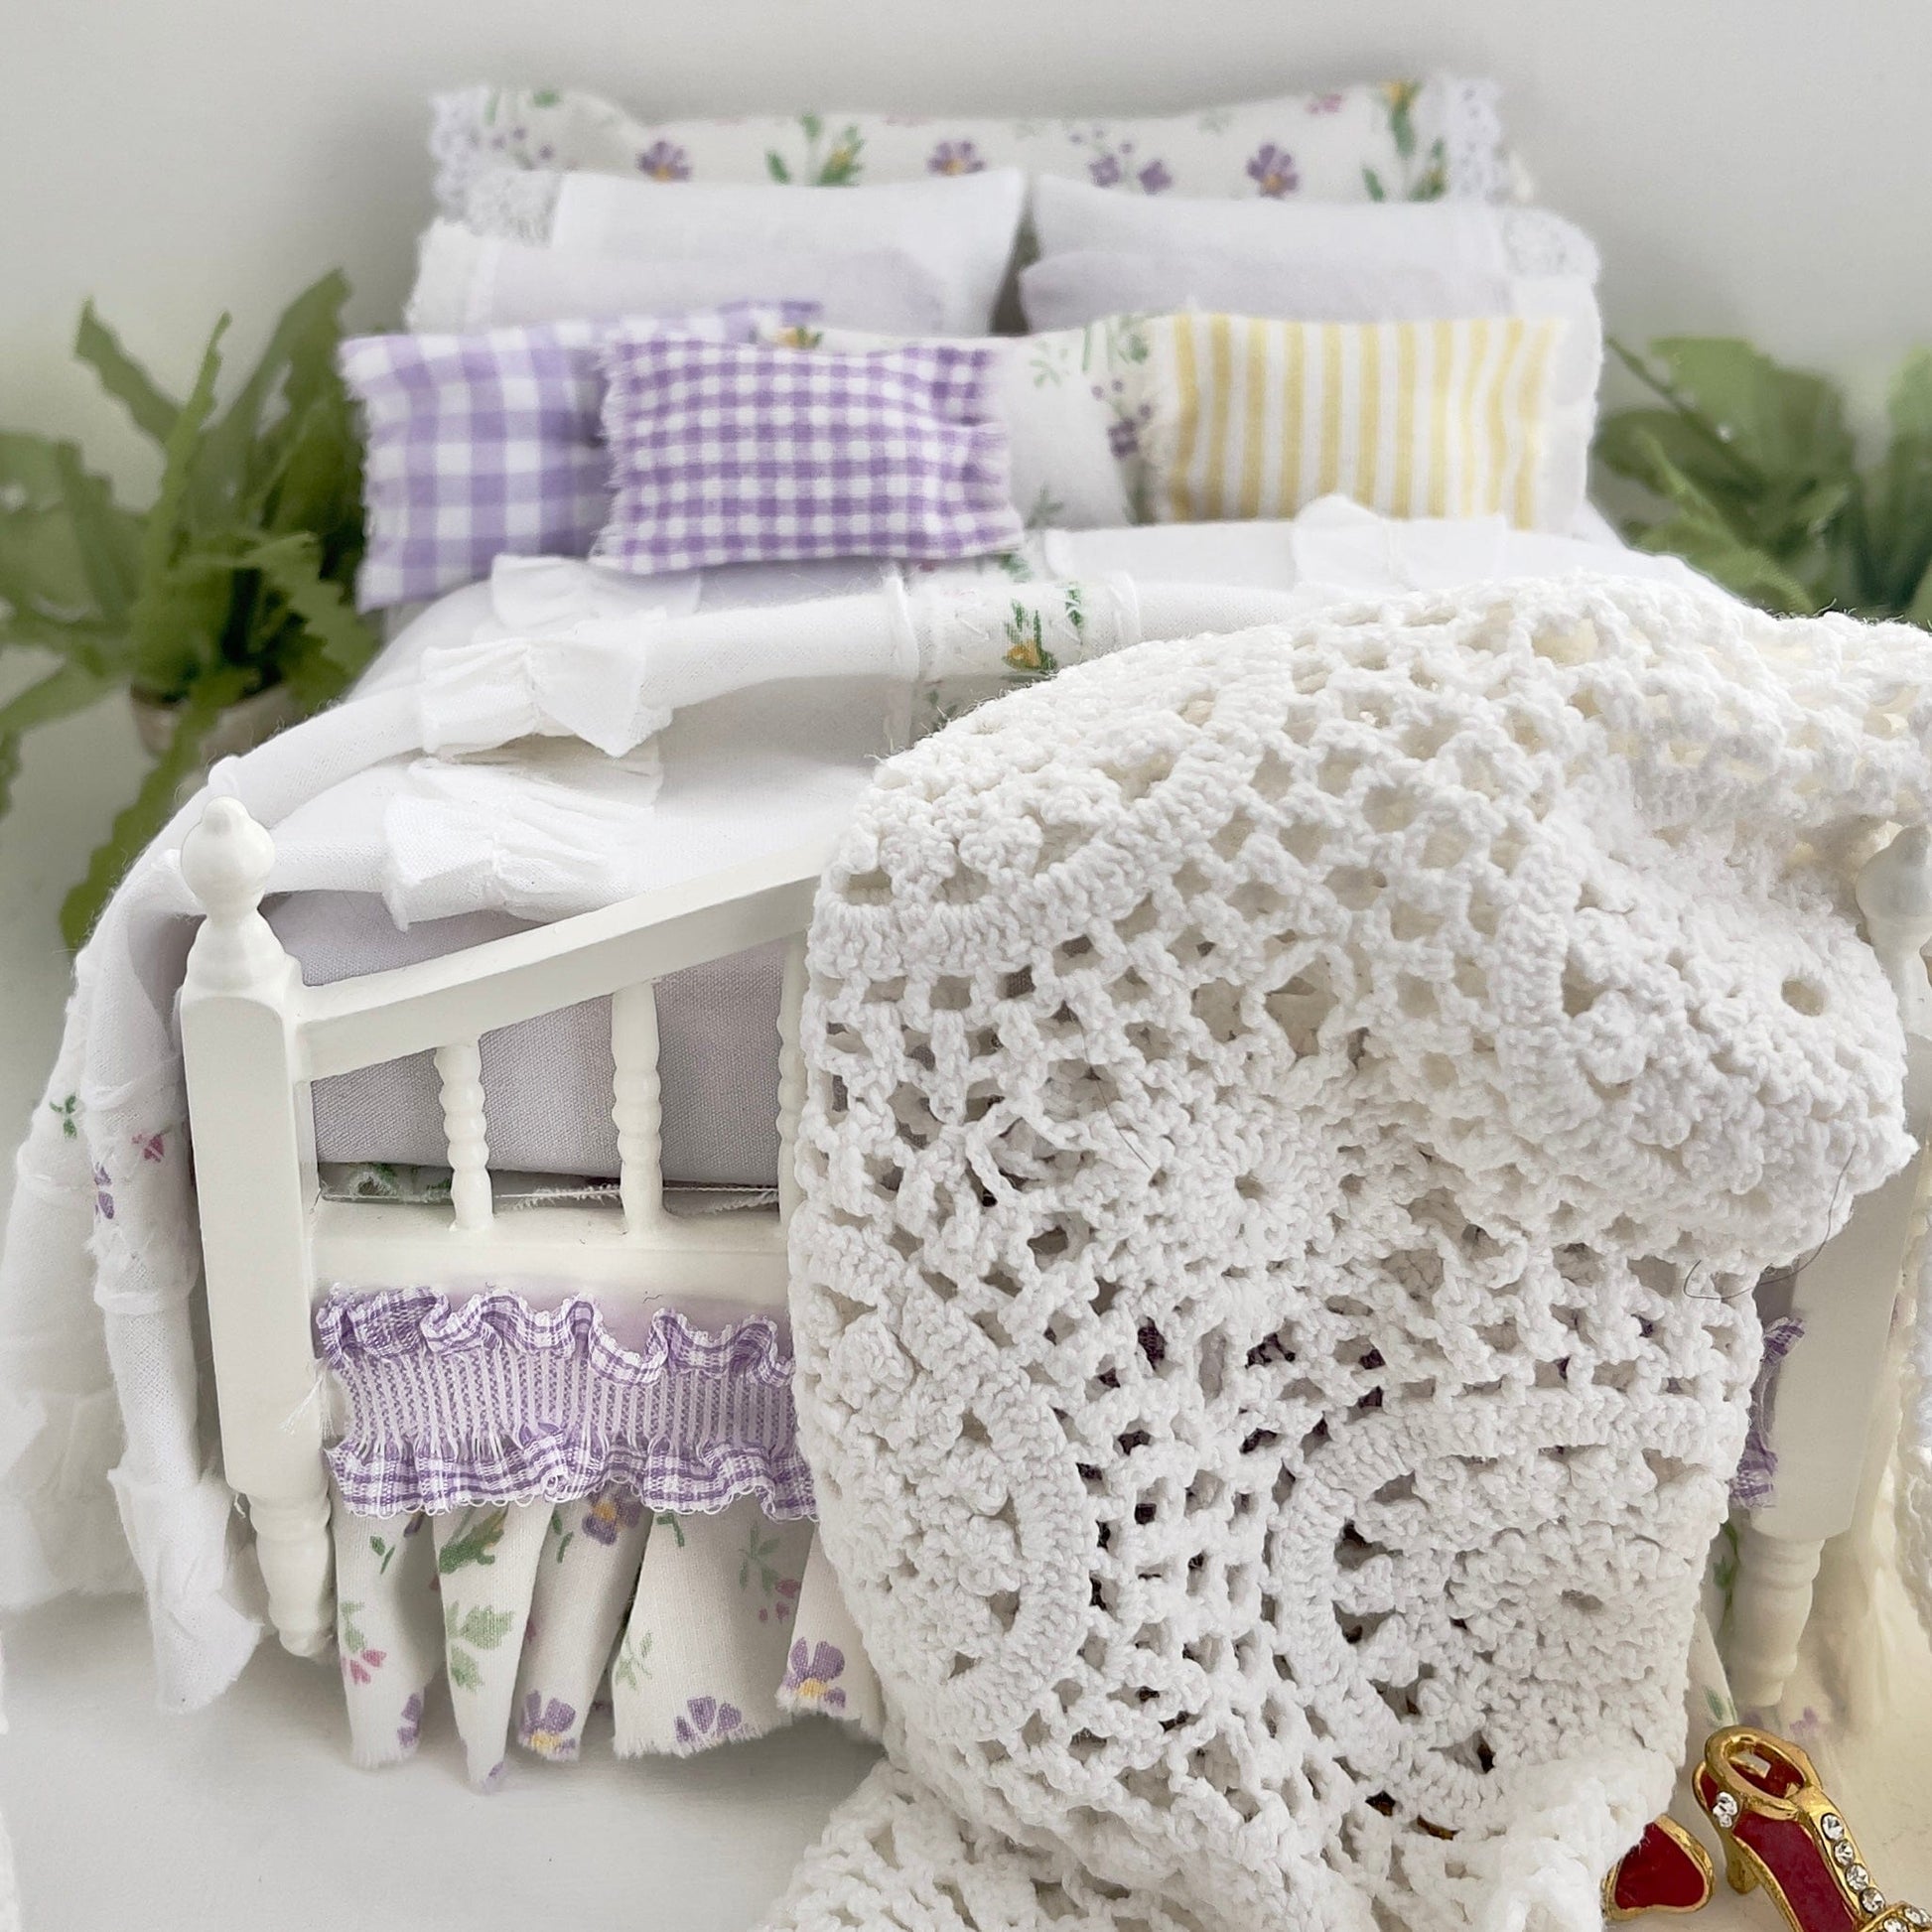 Chantallena Doll House Fix Dressed Bed | White Cotton with Lavender Pink Stripes and Roses, Crochet Knit Throw | Tara